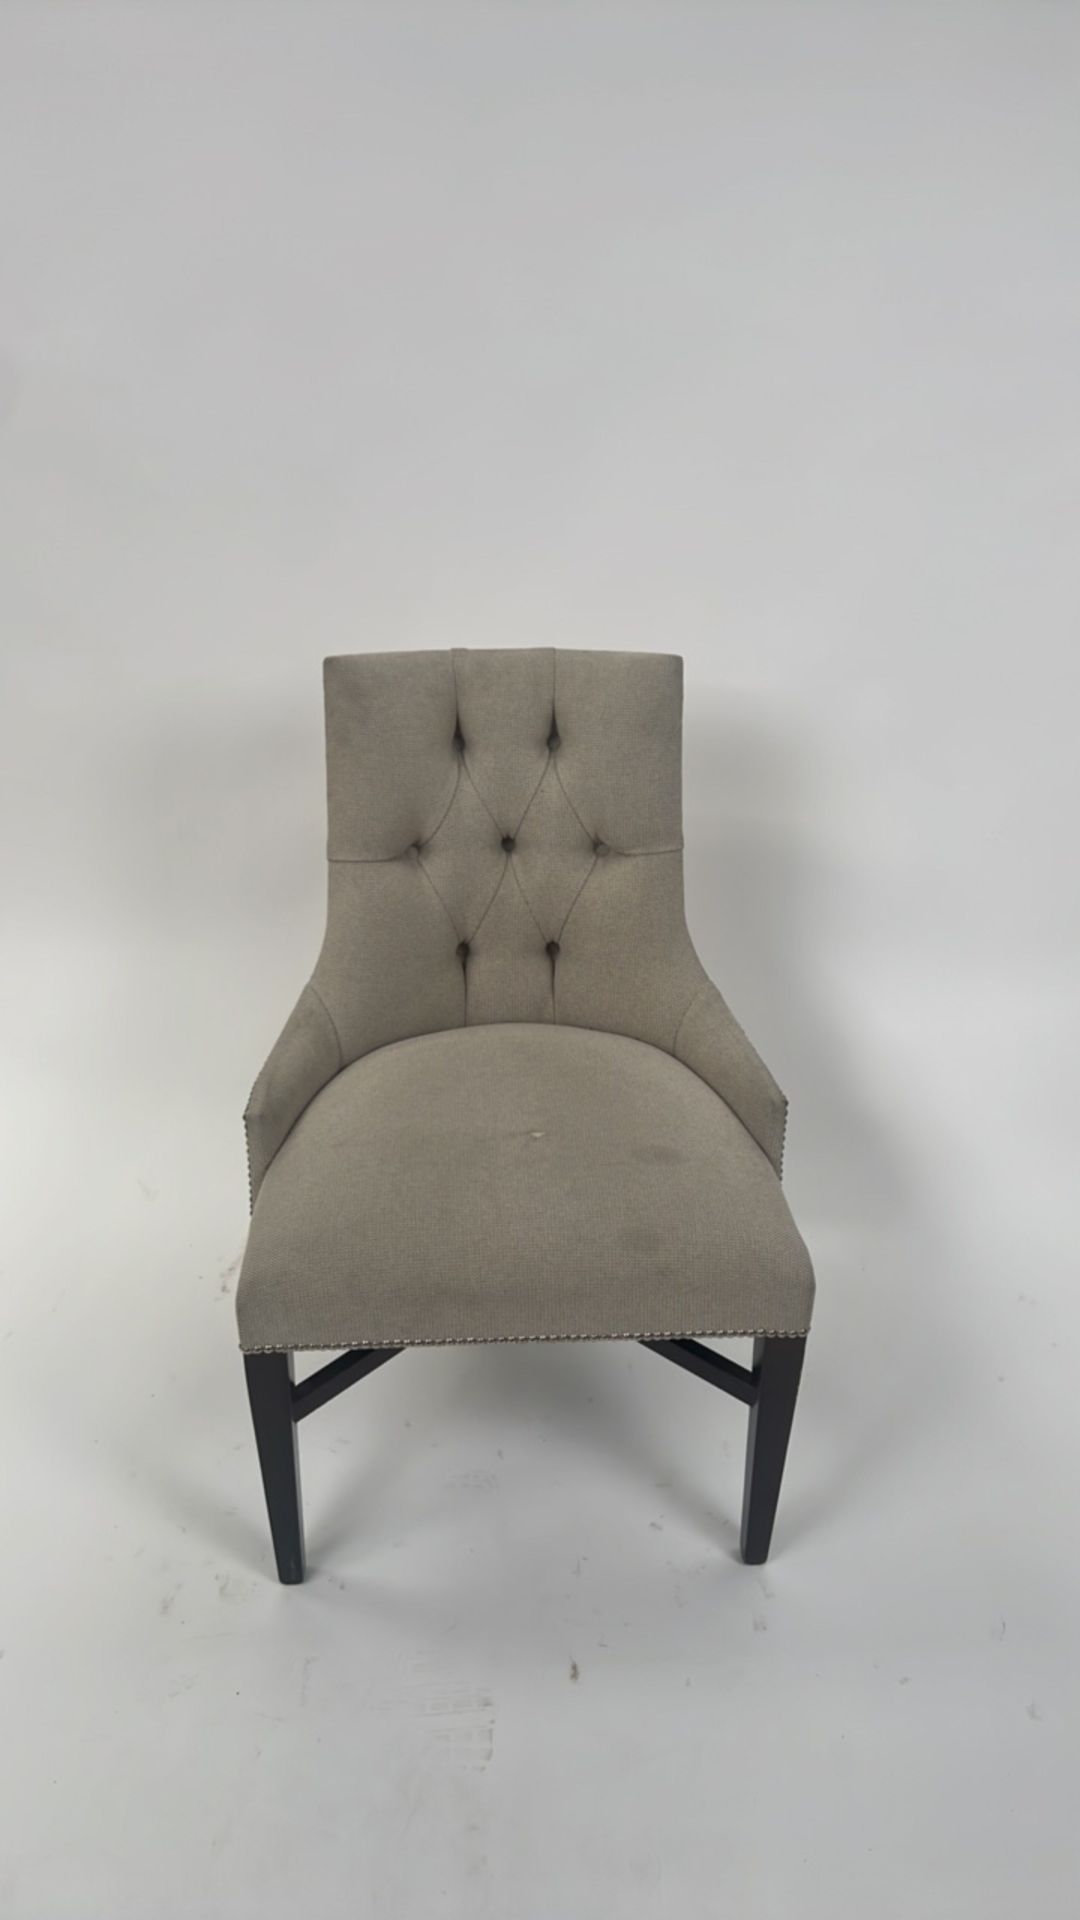 A Wooden and fabric chair